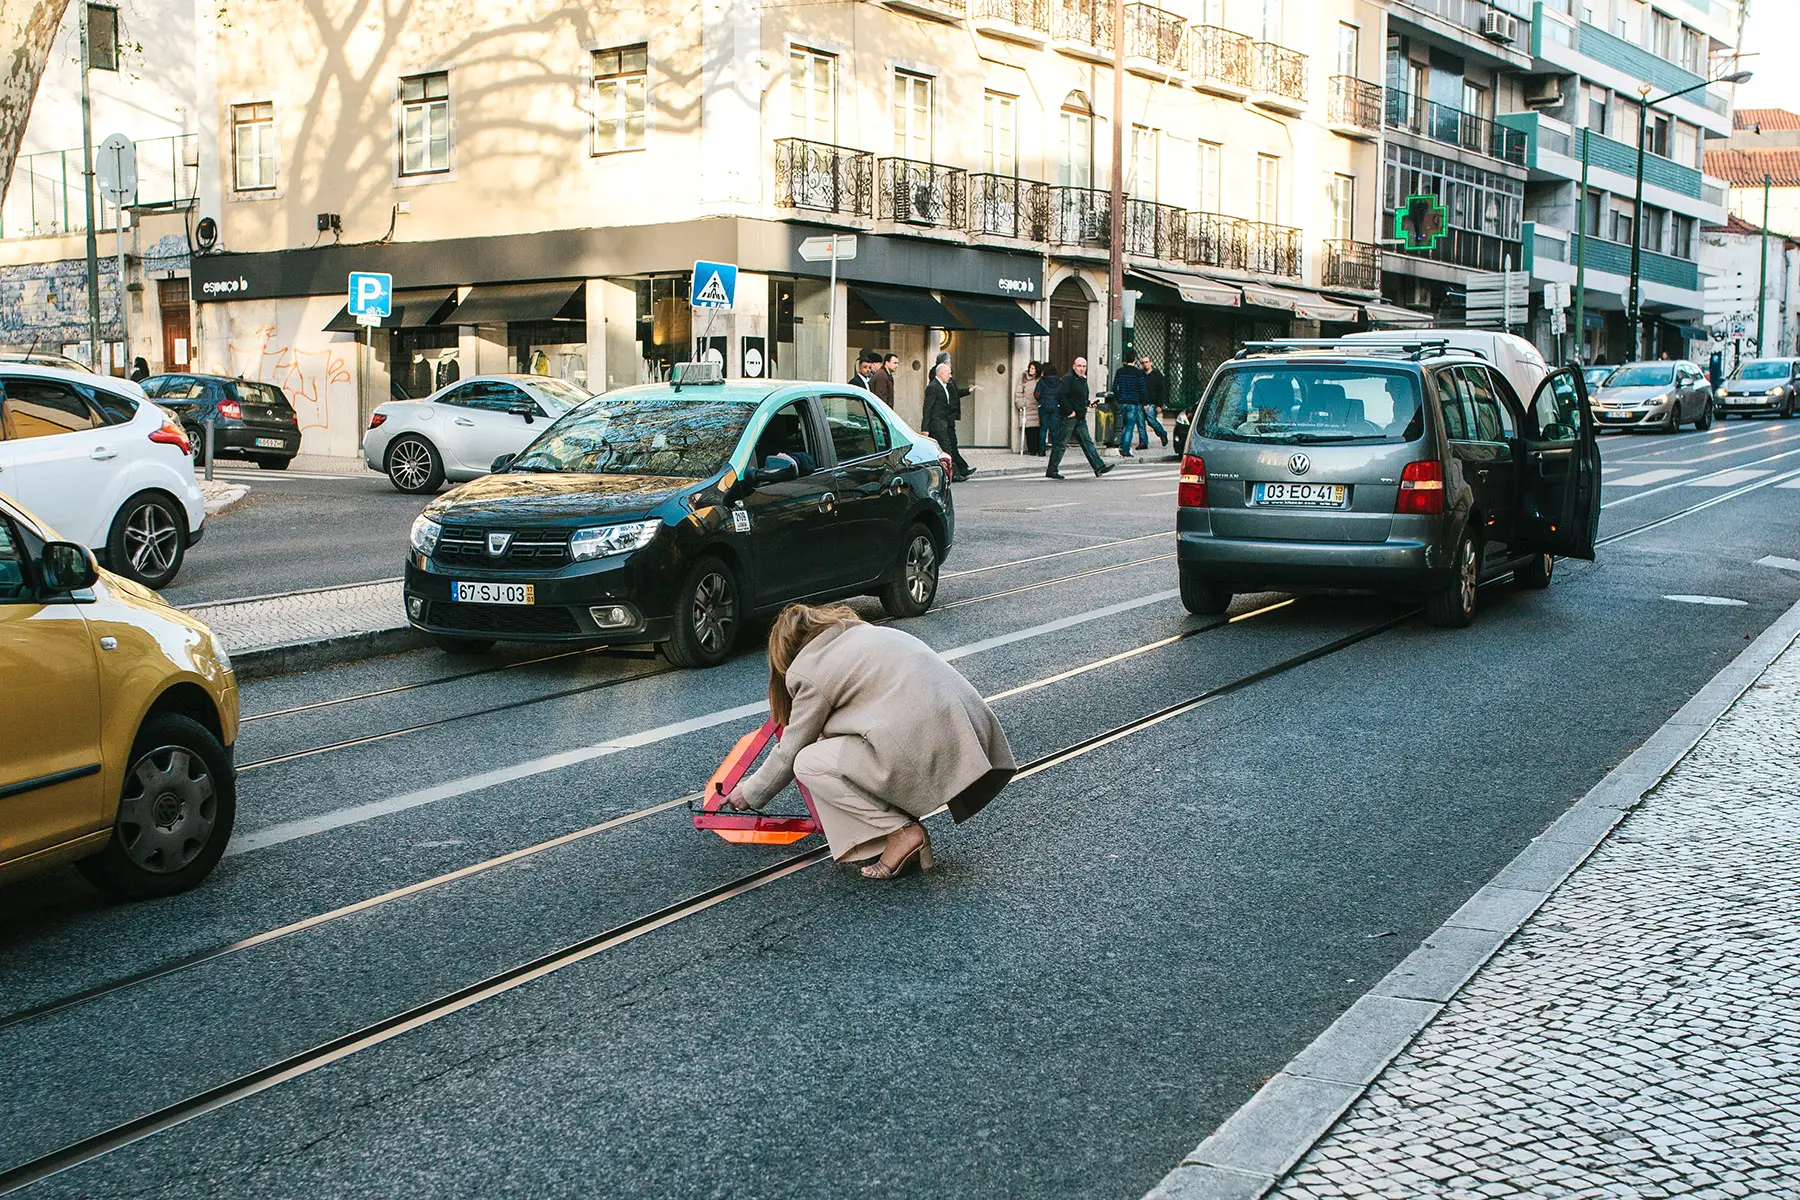 Driver sets up a warning sign after an accident in Lisbon, Portugal